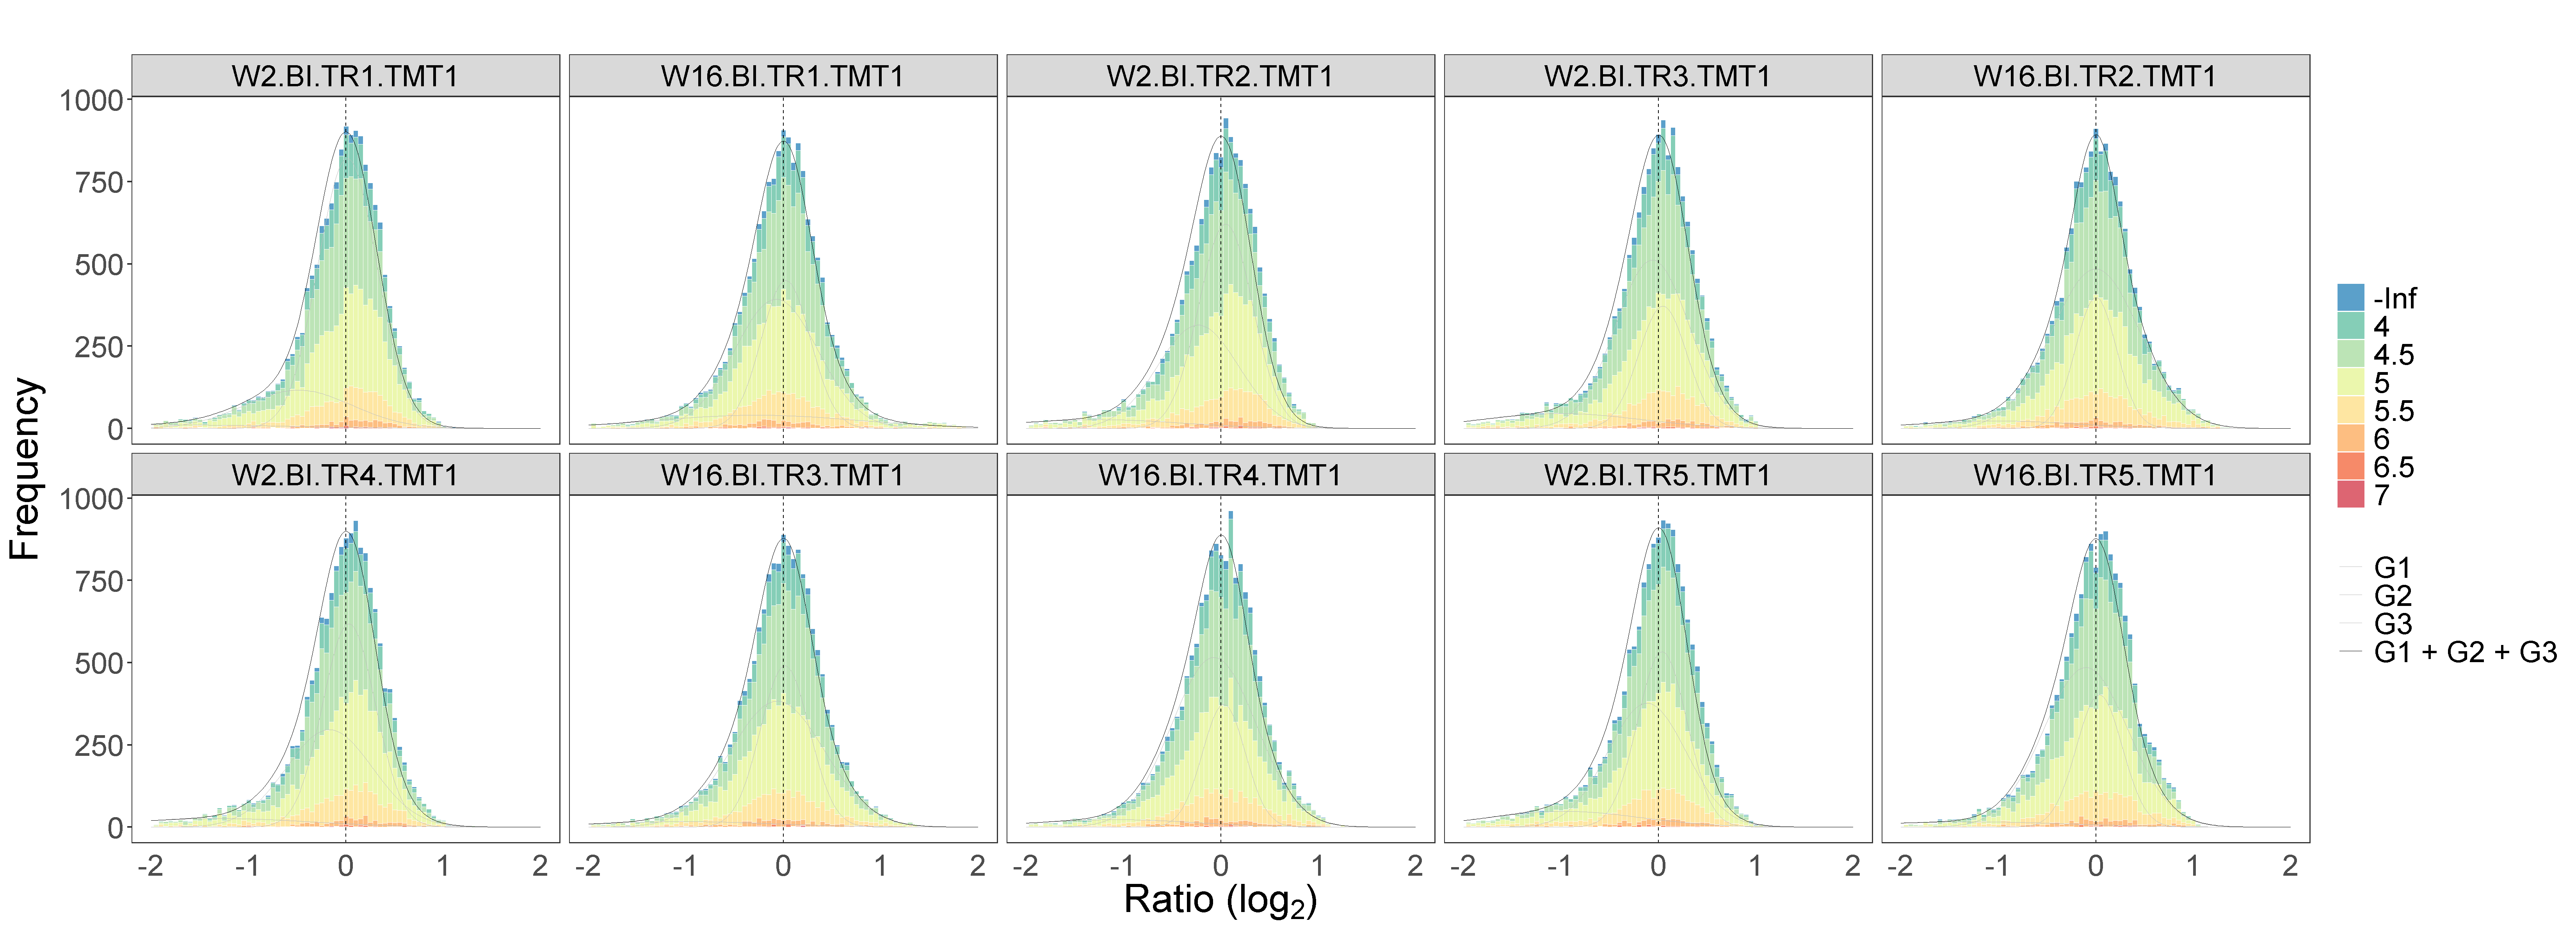 **Figure 2C-2D.** Histograms of peptide log2FC. Top: median-centering for all samples; bottom: `W2.BI.TR2.TMT1` aligned differently by Gaussian density